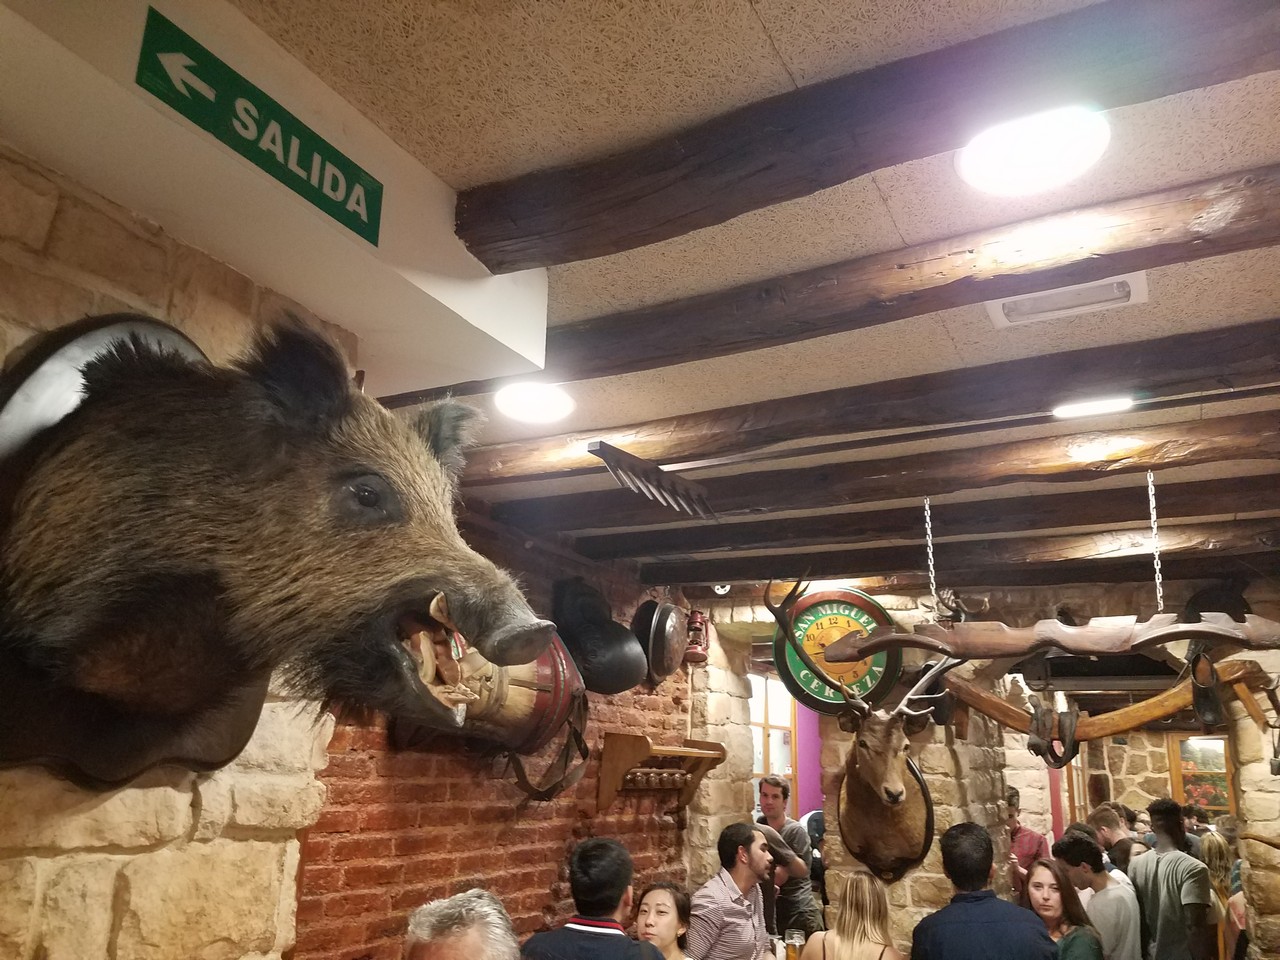 a group of people in a room with a fake boar head